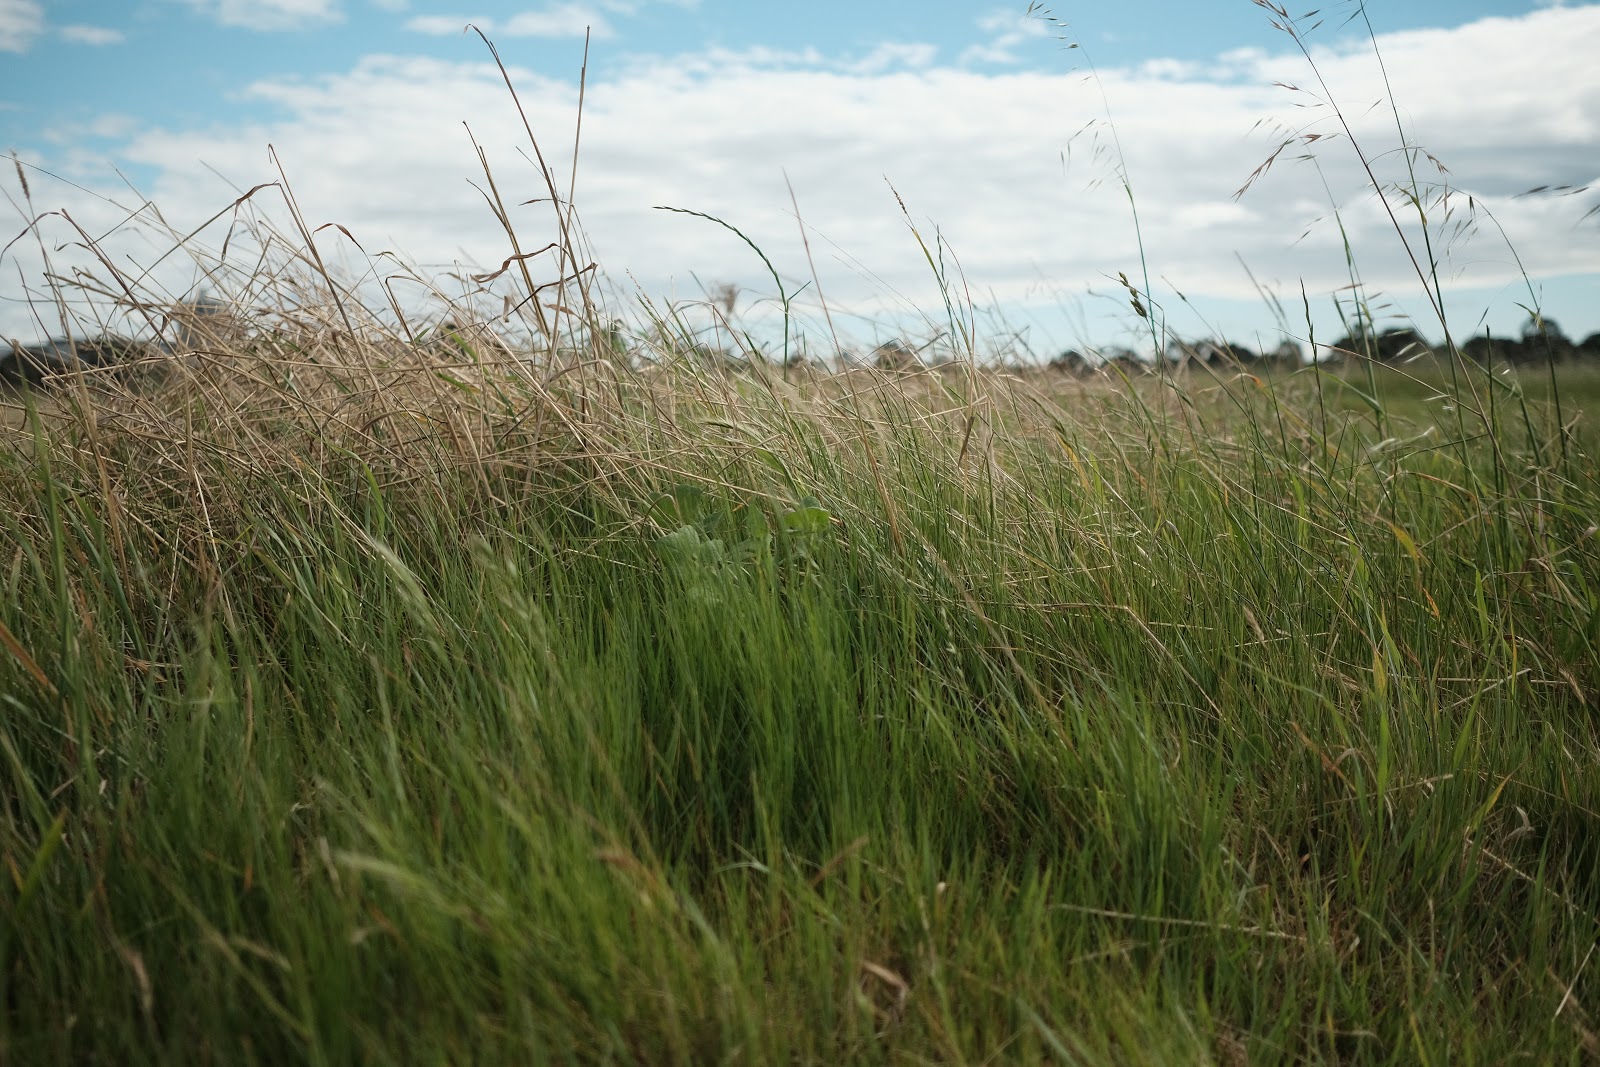 photo of thick native grass, green stalks with dry brown tips, against a cloudy blue sky